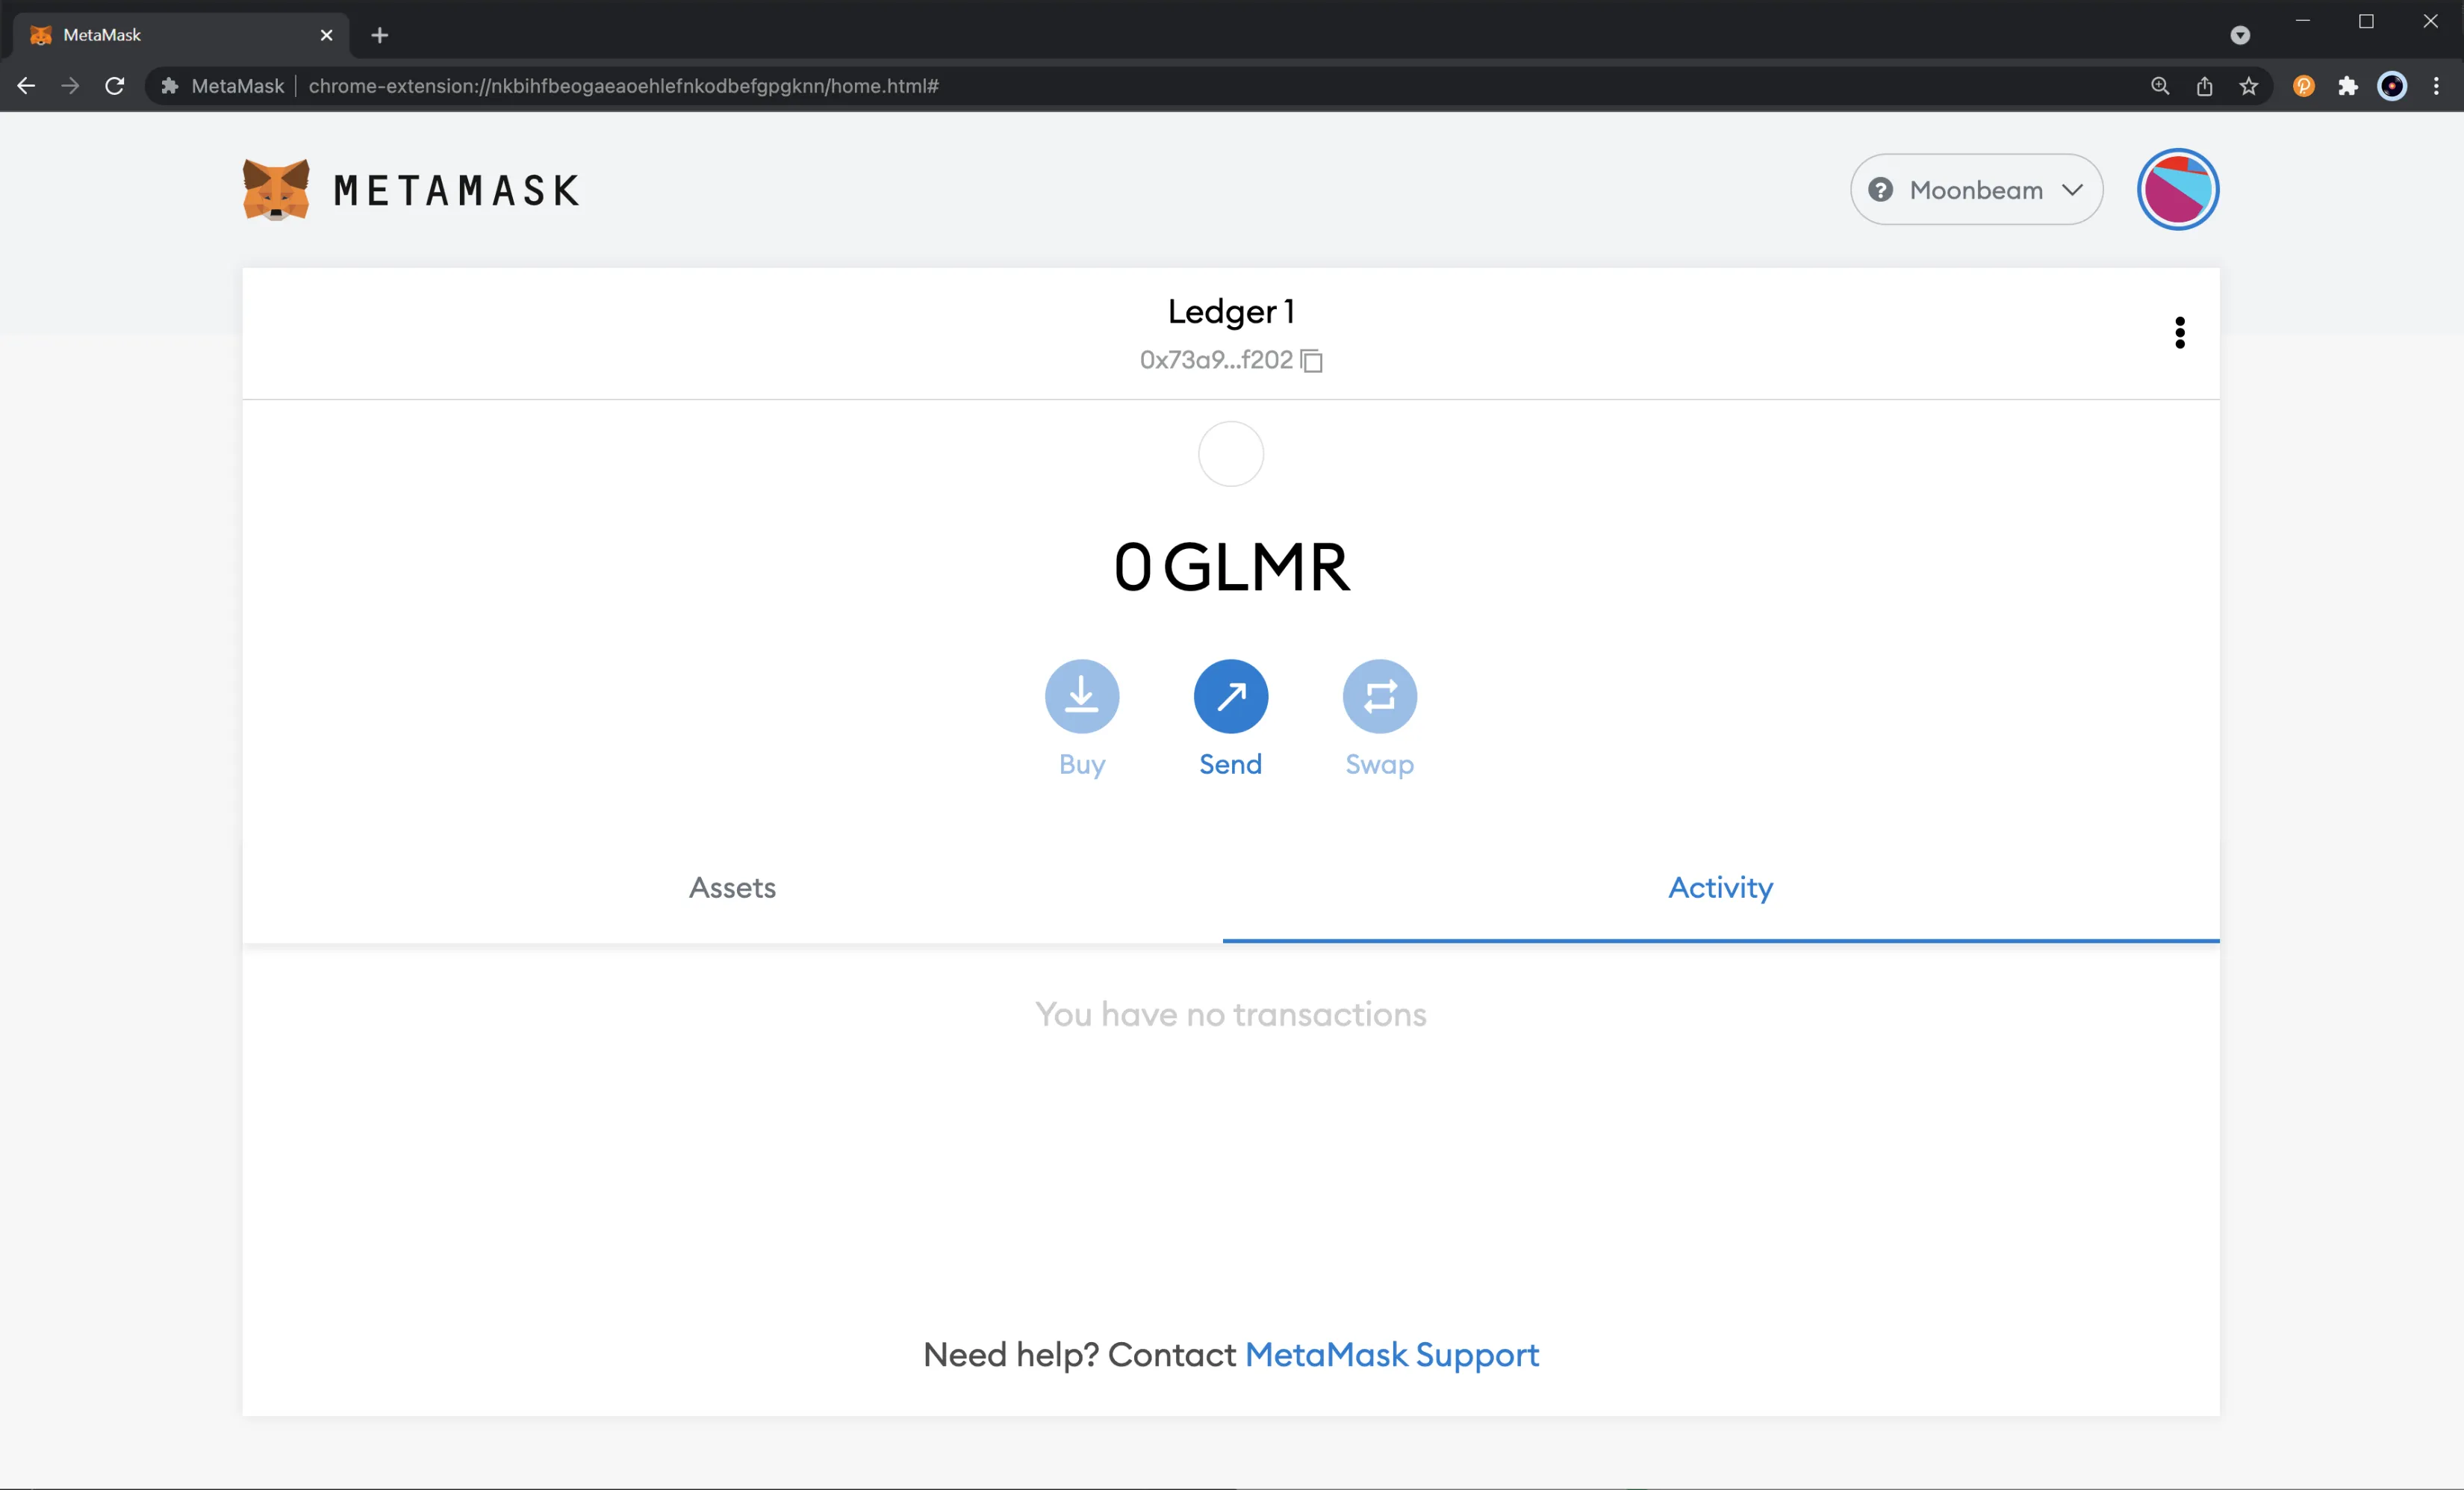 MetaMask Successfully Imported Ledger Account